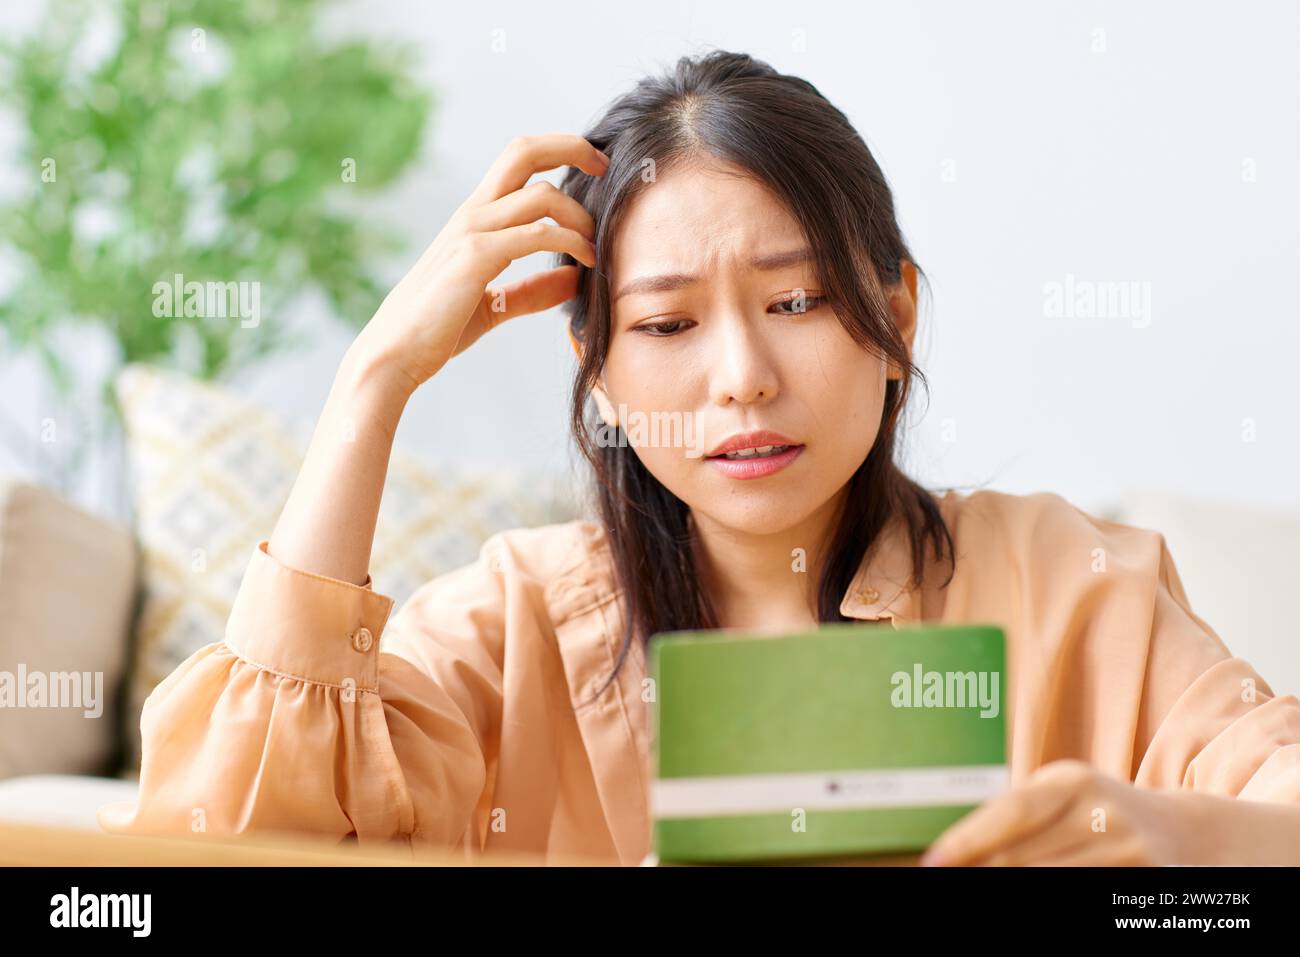 Woman holding a bank note and looking at it Stock Photo